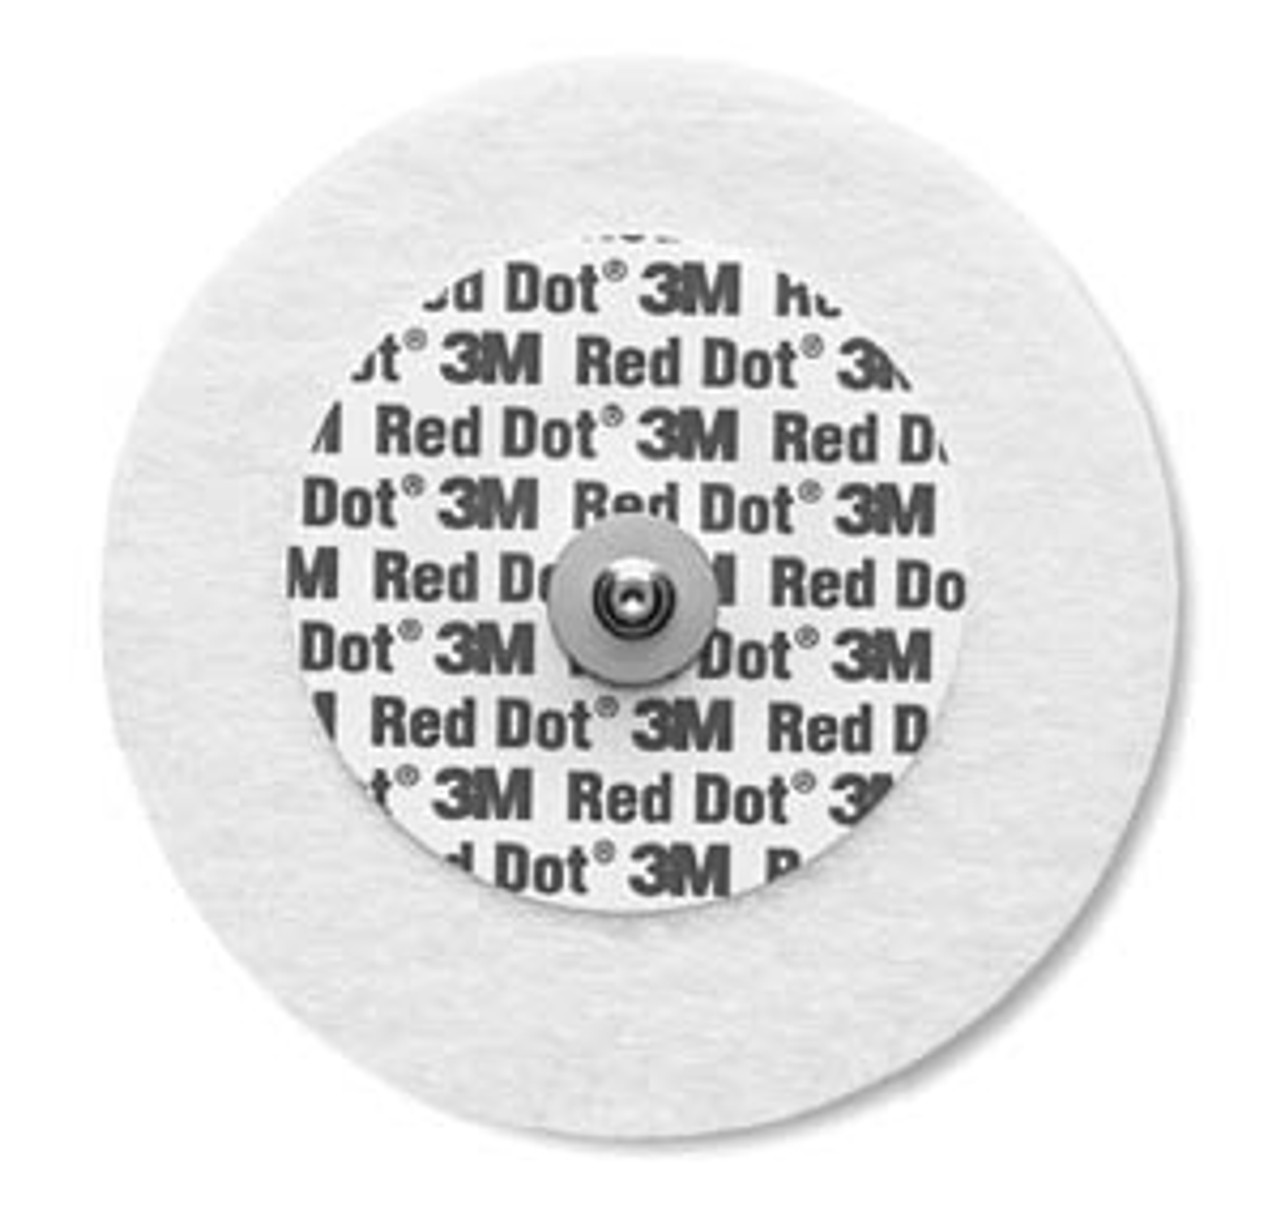 3M RED DOT MONITORING ELECTRODES WITH MICROPORE TAPE BACKING, 2239